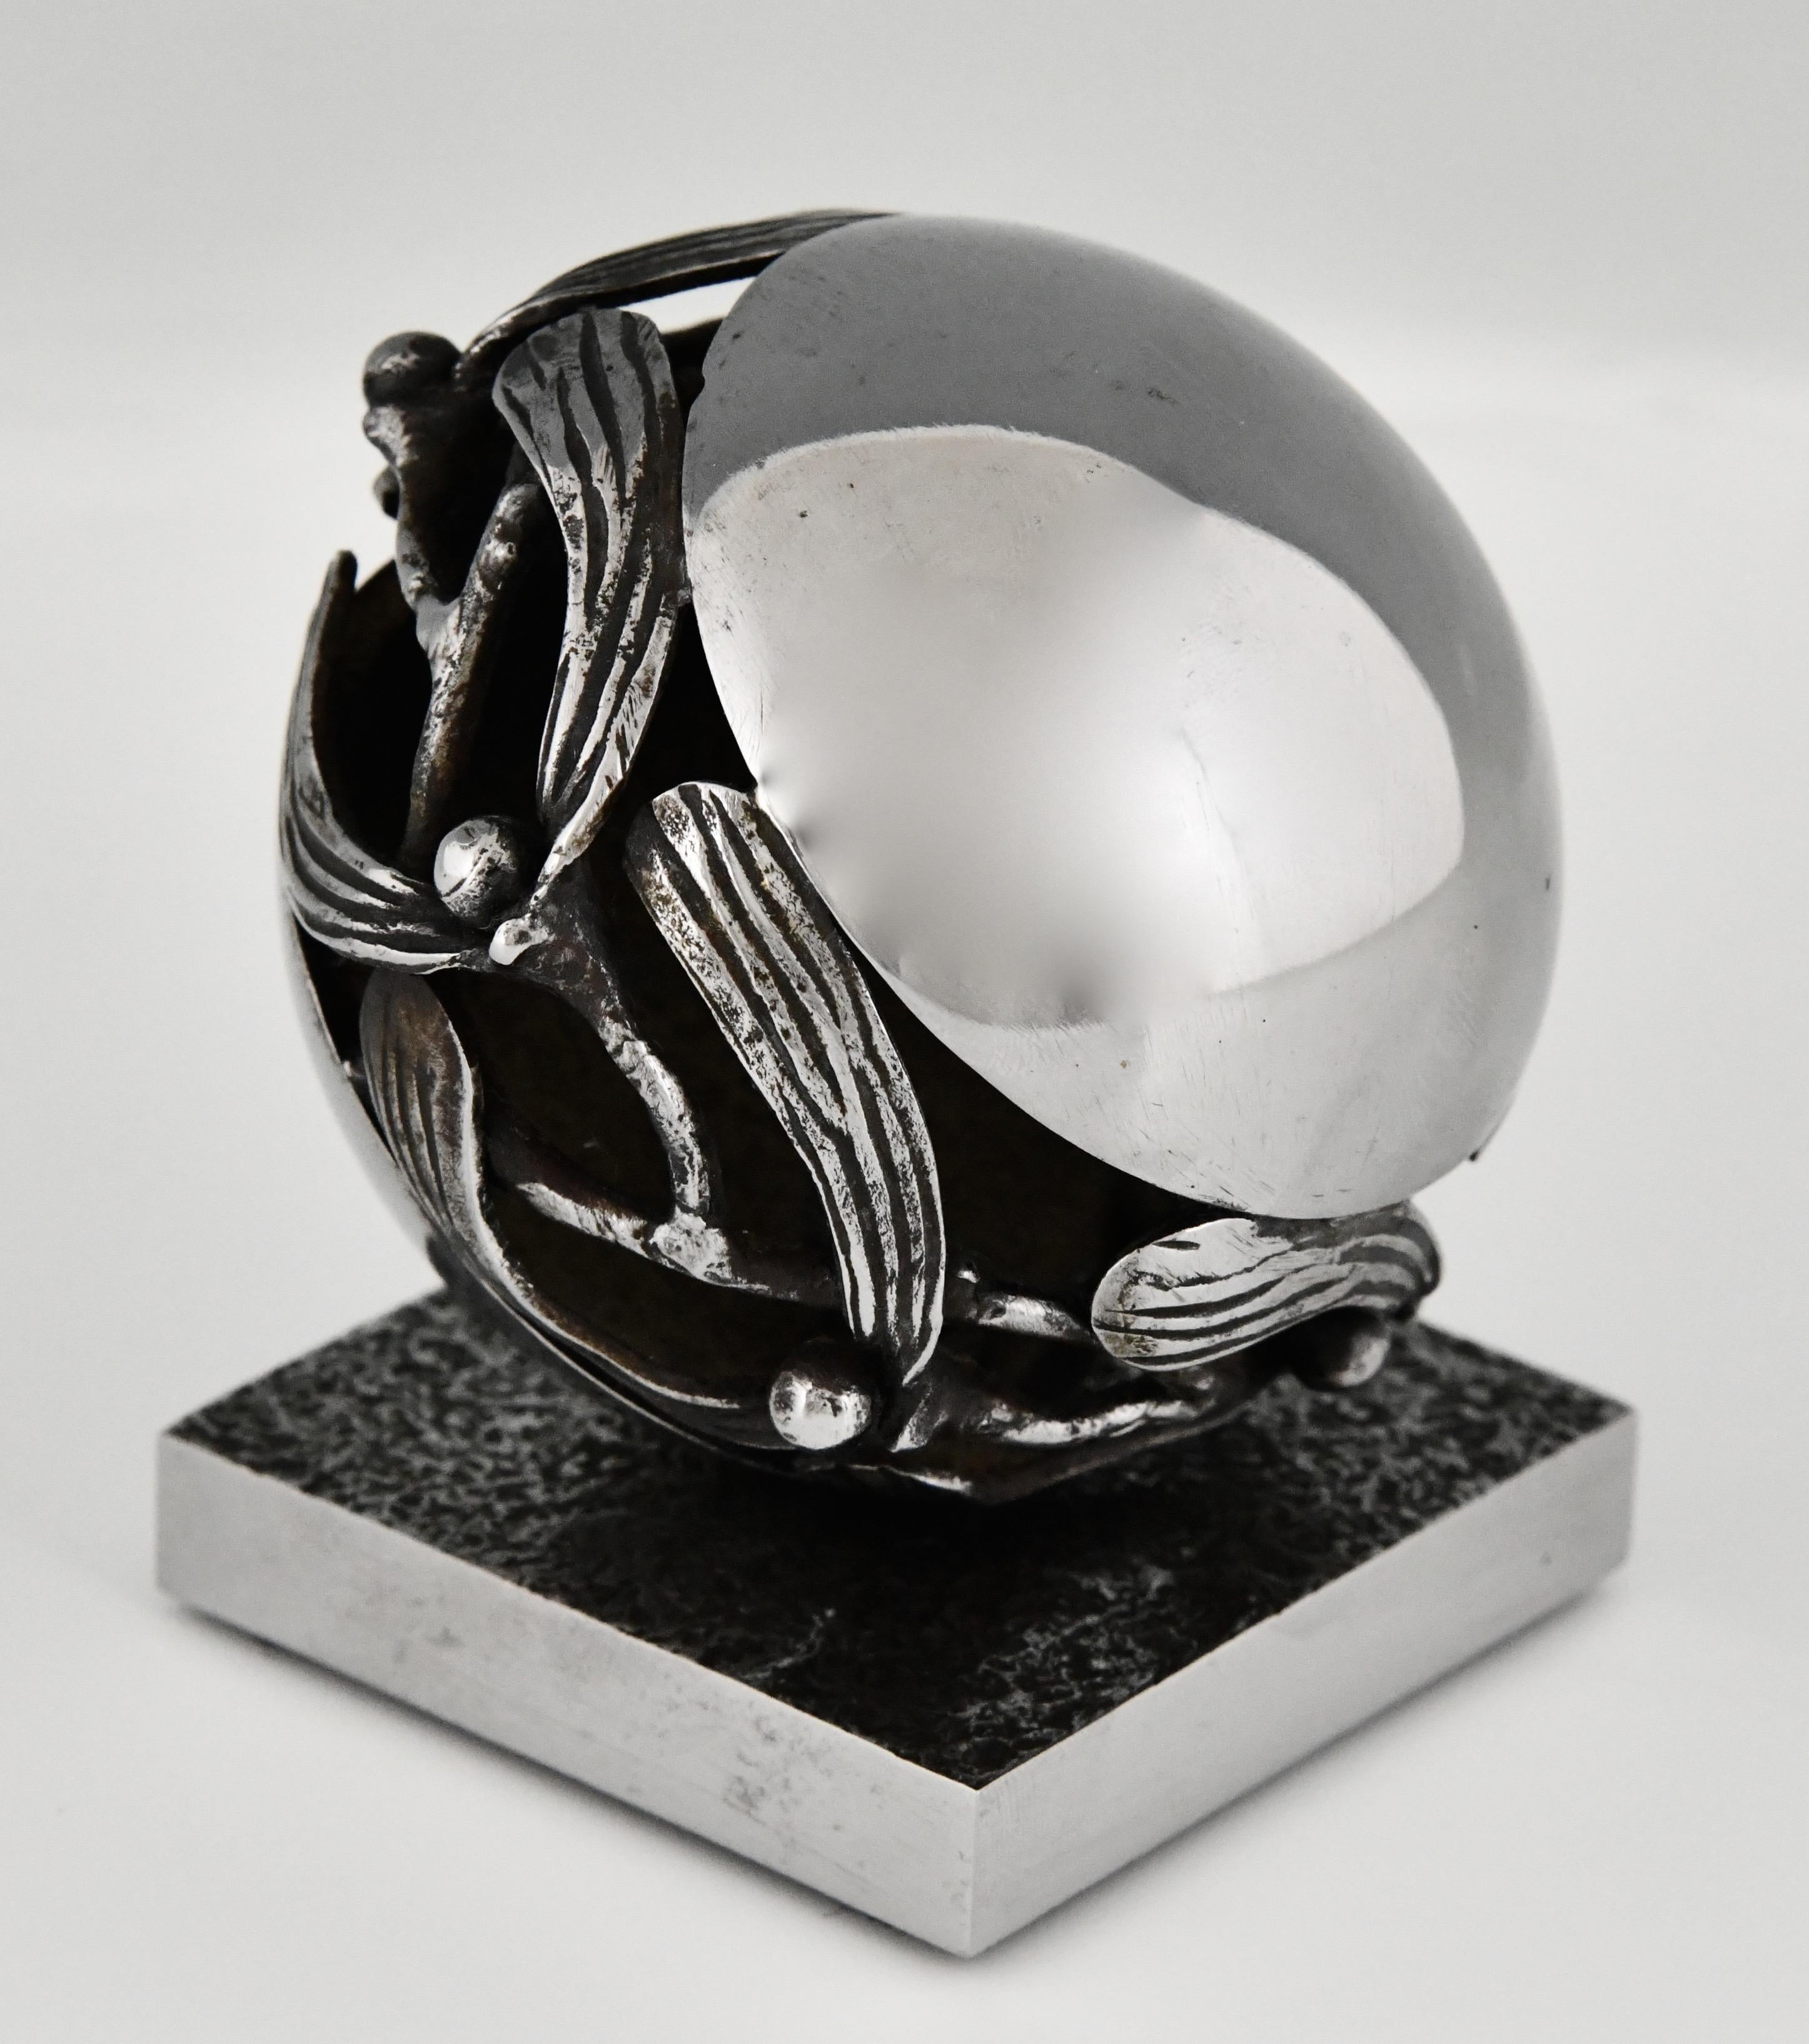 French Art Deco Wrought Iron Mistletoe Paperweight by Edgar Brandt 1921 For Sale